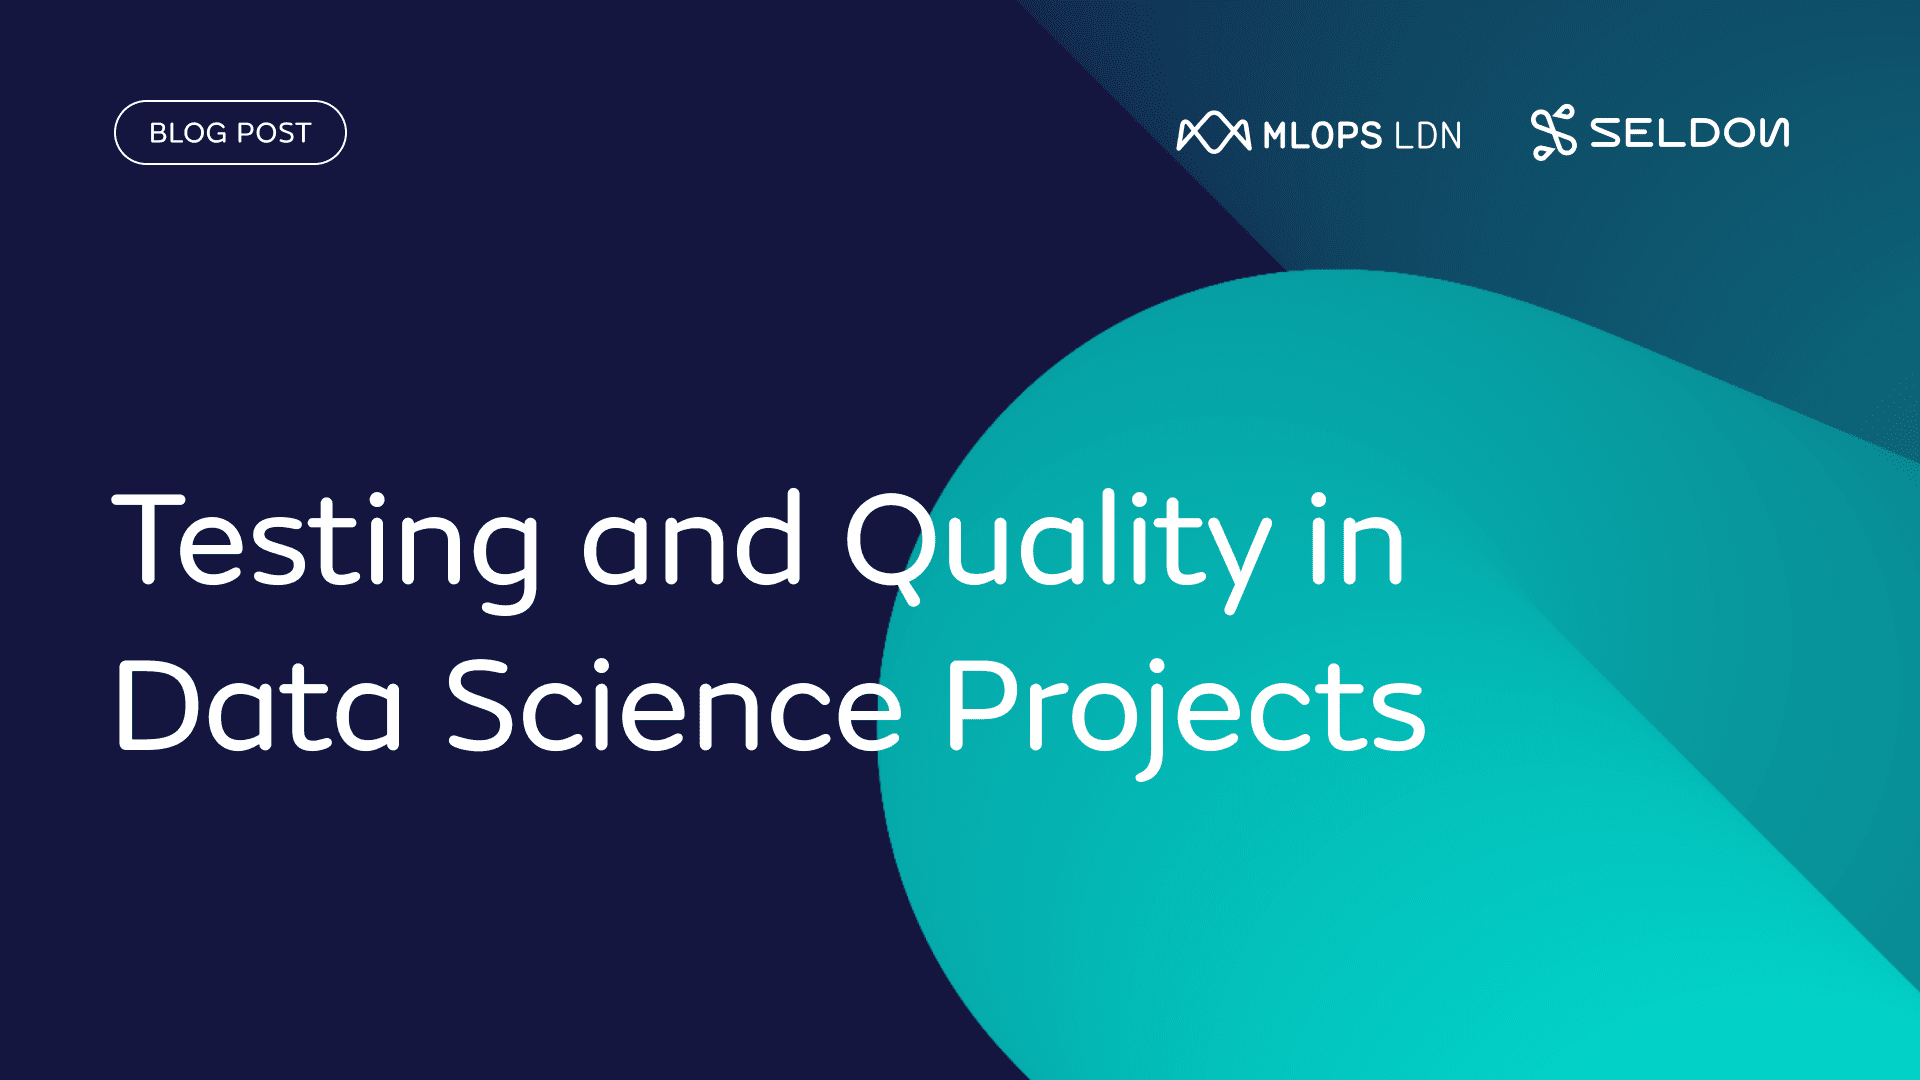 MLOps London October: Testing and Quality in Data Science Projects